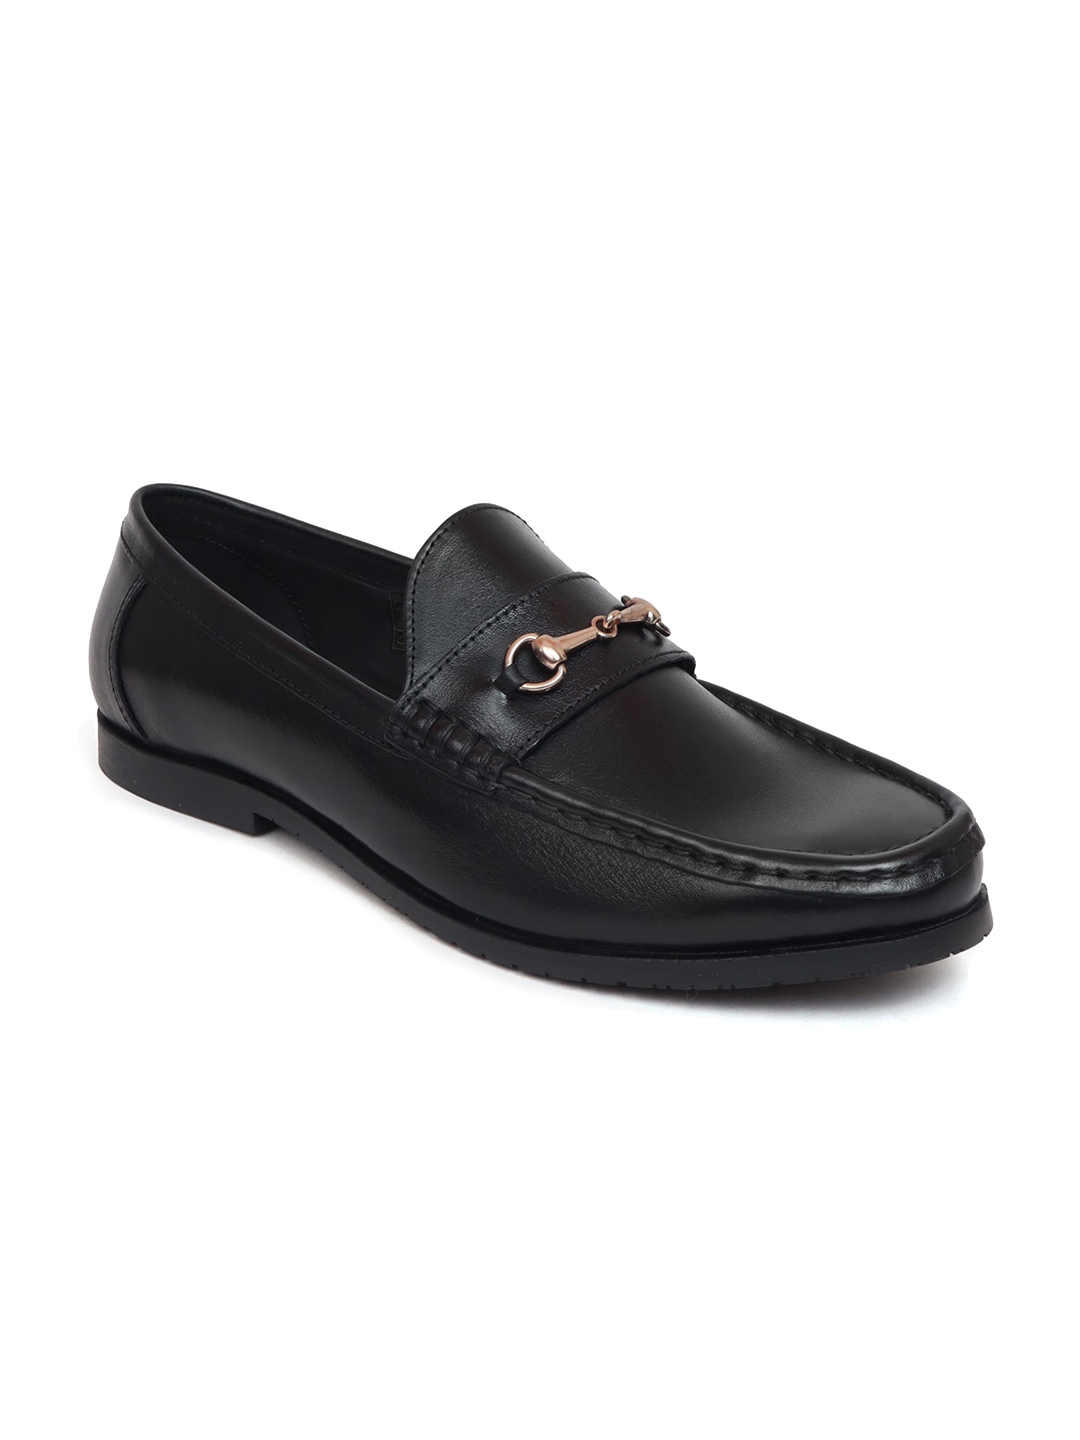 Leather Loafer Formal Shoes For Men – 2129  Buy Loafer Shoes Online – Zoom  Shoes India